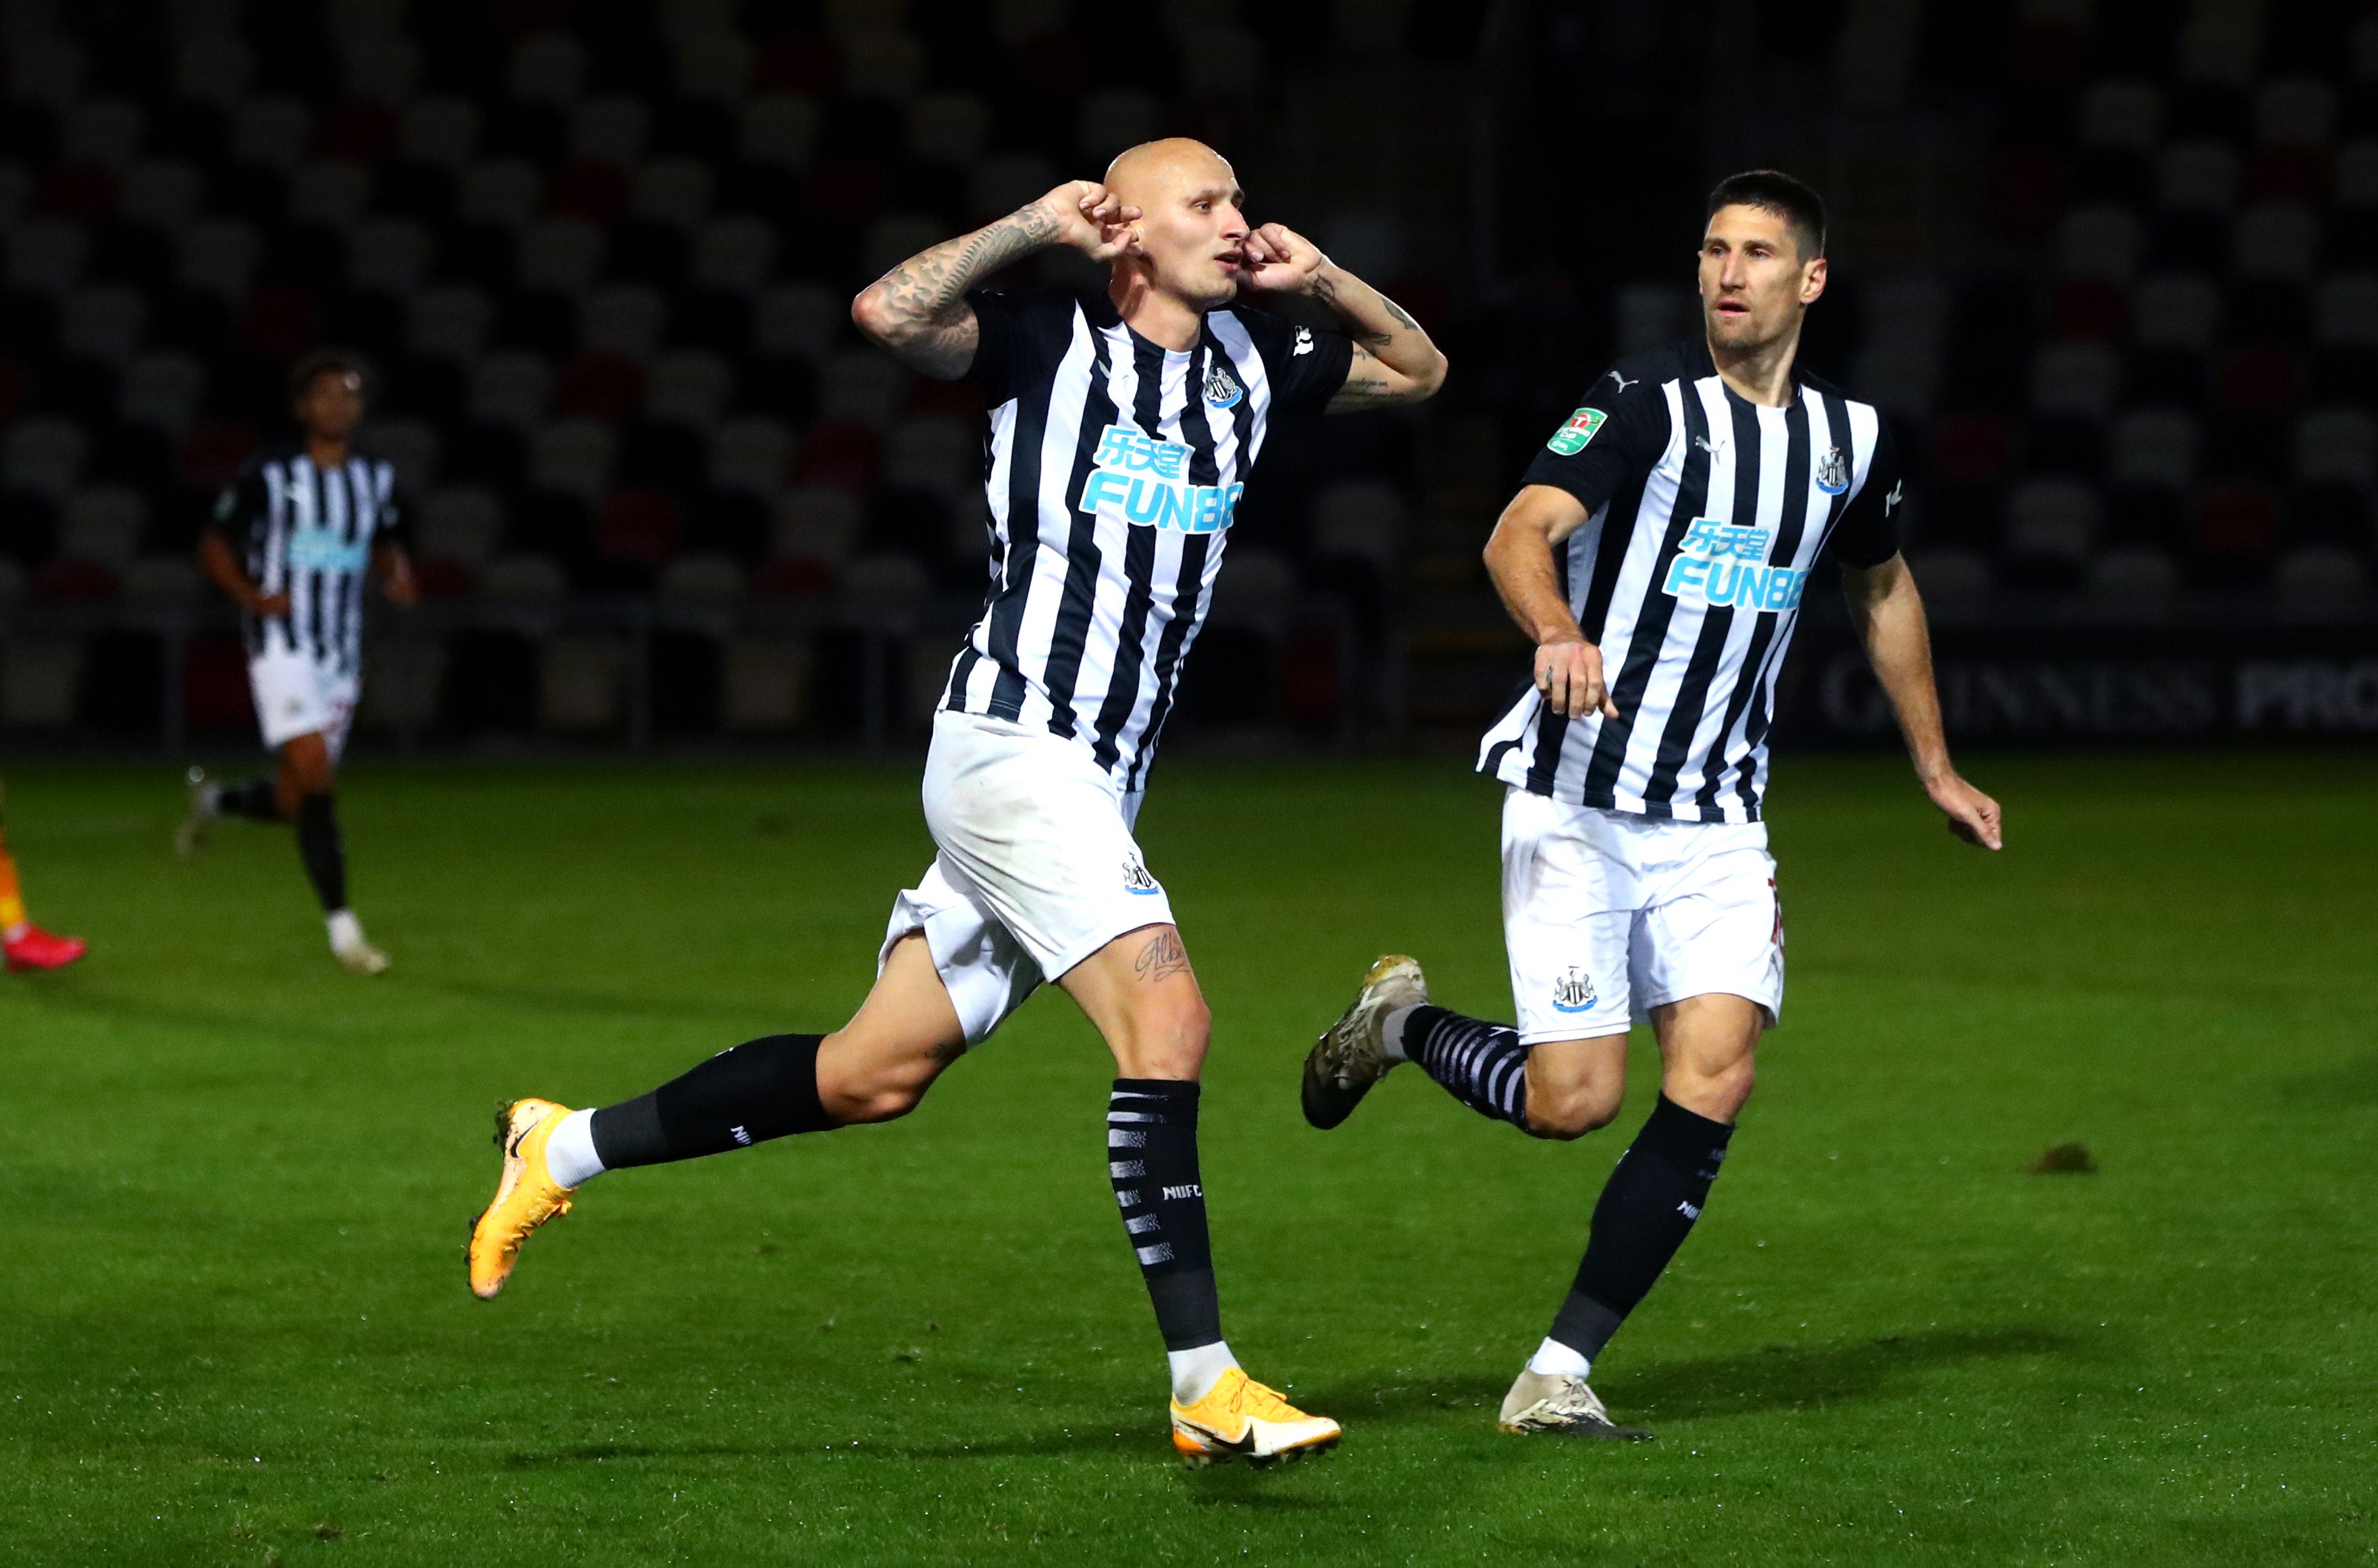 newcastle-survive-shootout-scare-against-newport-to-reach-carabao-cup-quarterfinals